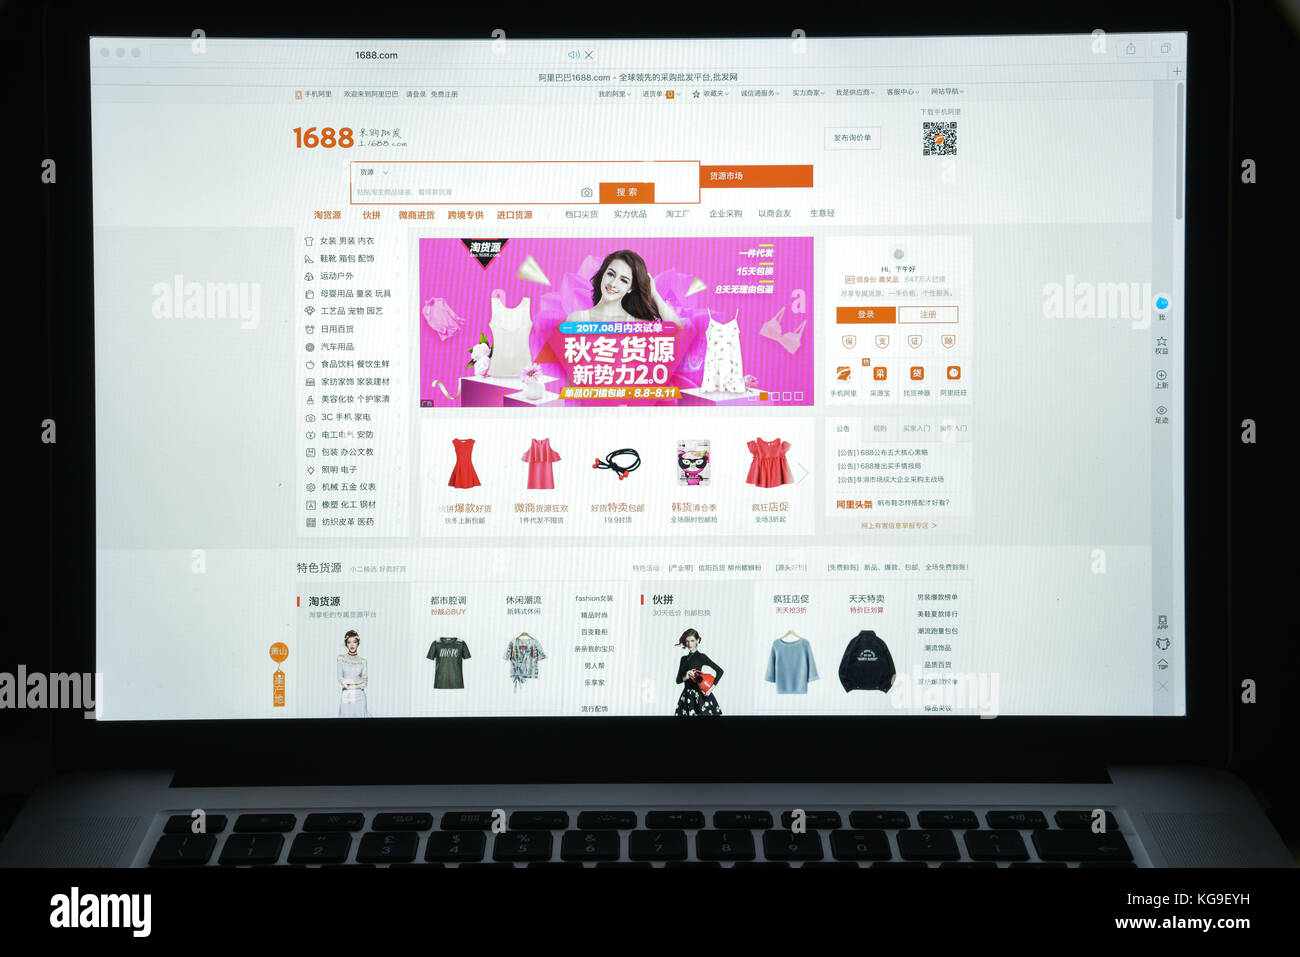 Milan, Italy - August 10, 2017: 1688 website homepage. 1688.com is also called Alibaba.cn, it's the Chinese Alibaba wholesale site 1688 logo visible. Stock Photo